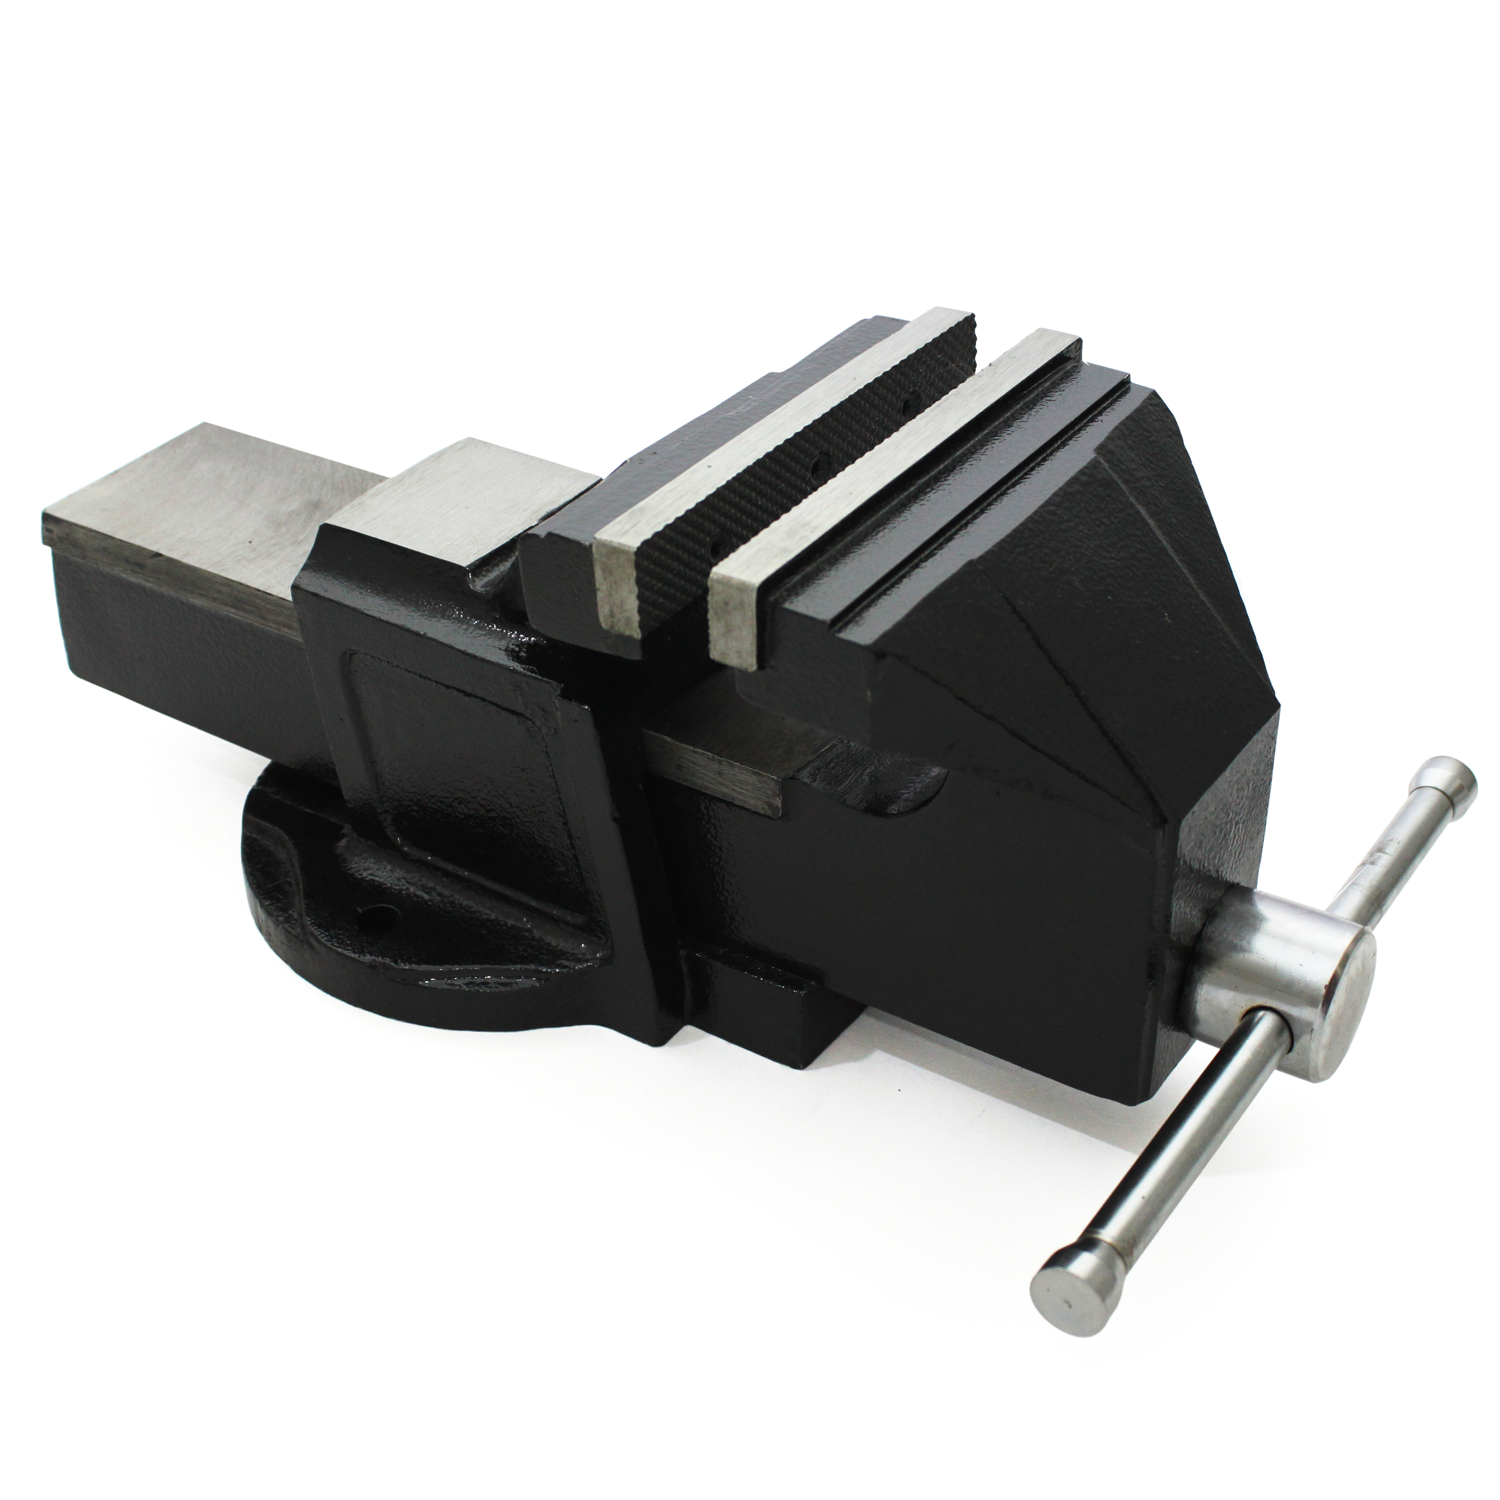 Heavy Duty SG Iron Steel Fixed Bench Vice with Fixed Base by Oltre